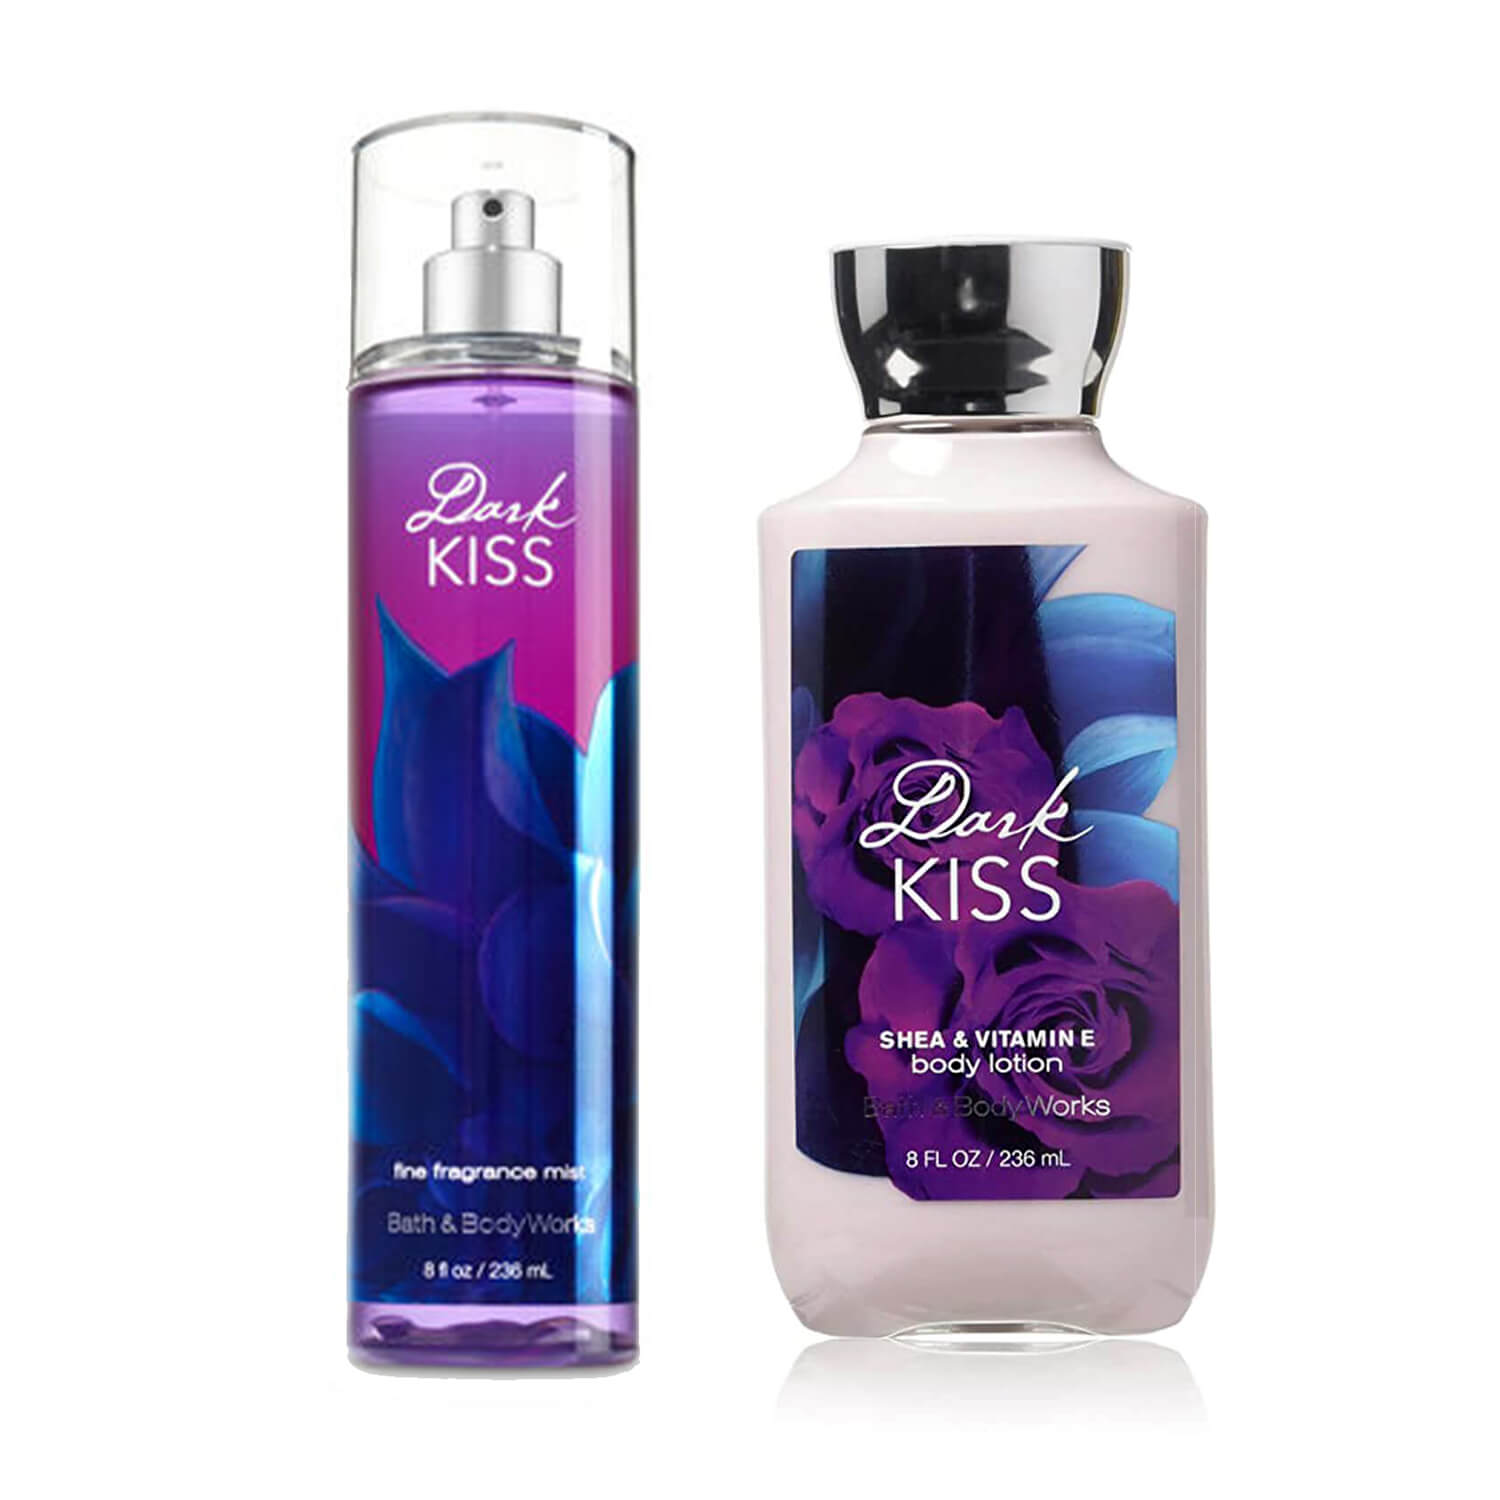 buy bath and body works mist and body lotion in dark kiss fragrance available at Heygirl.pk for delivery in Pakistan